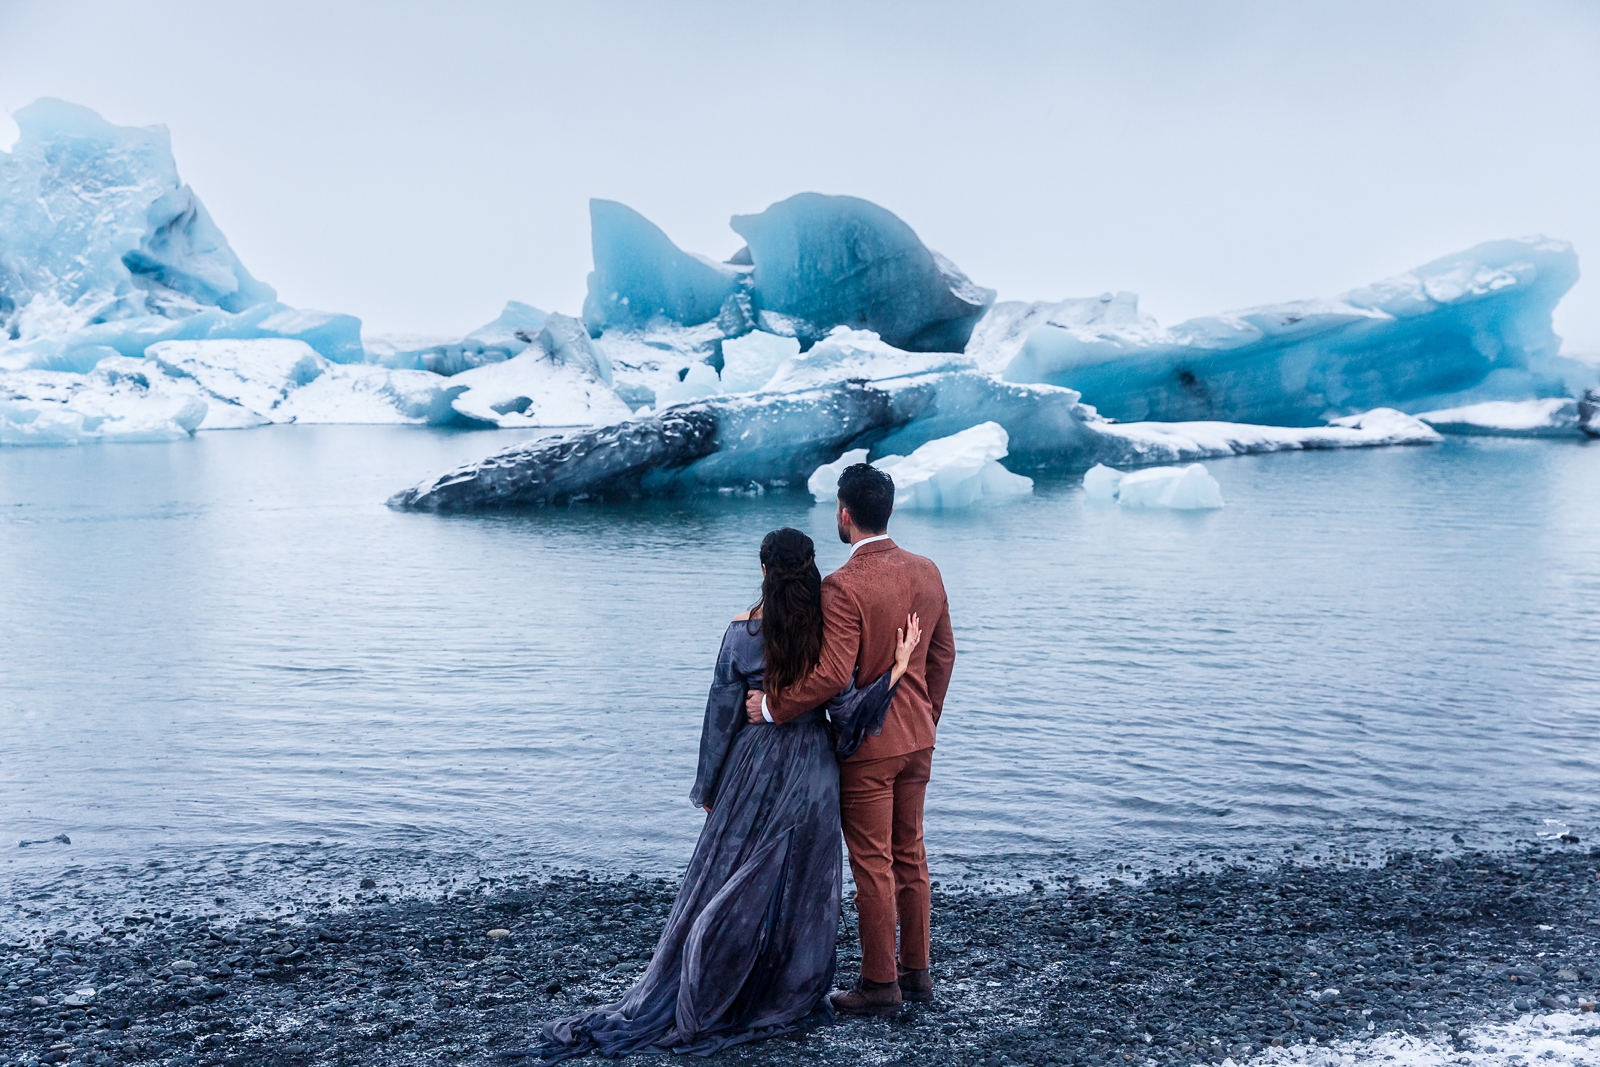 Eloping couple gazing at the otherworldly ice formations in the Jökulsárlón glacier lagoon, Iceland.